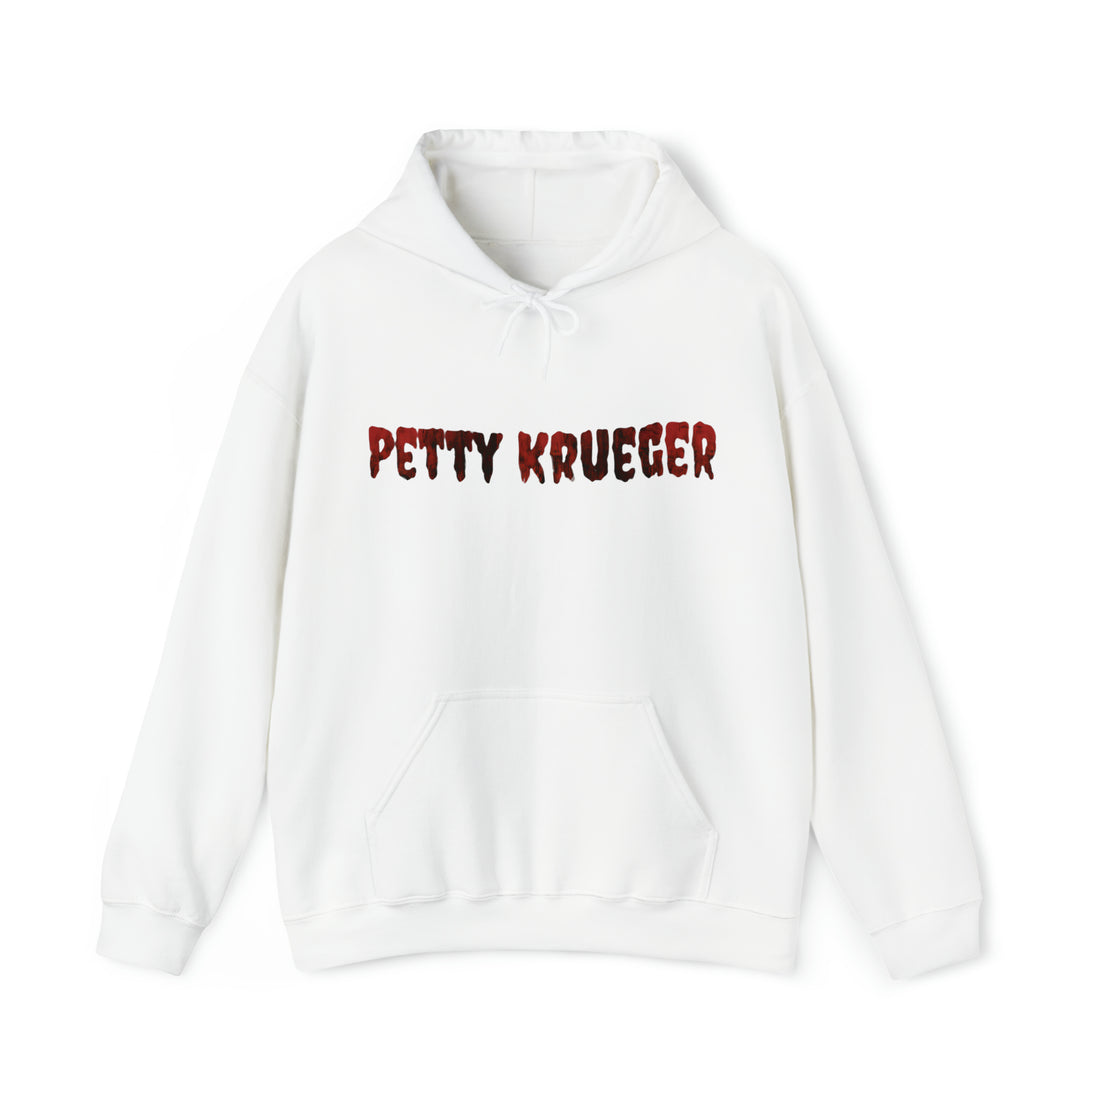 Petty Krueger: Embrace Your Petty Side with the Krueger Comfort Hoodie